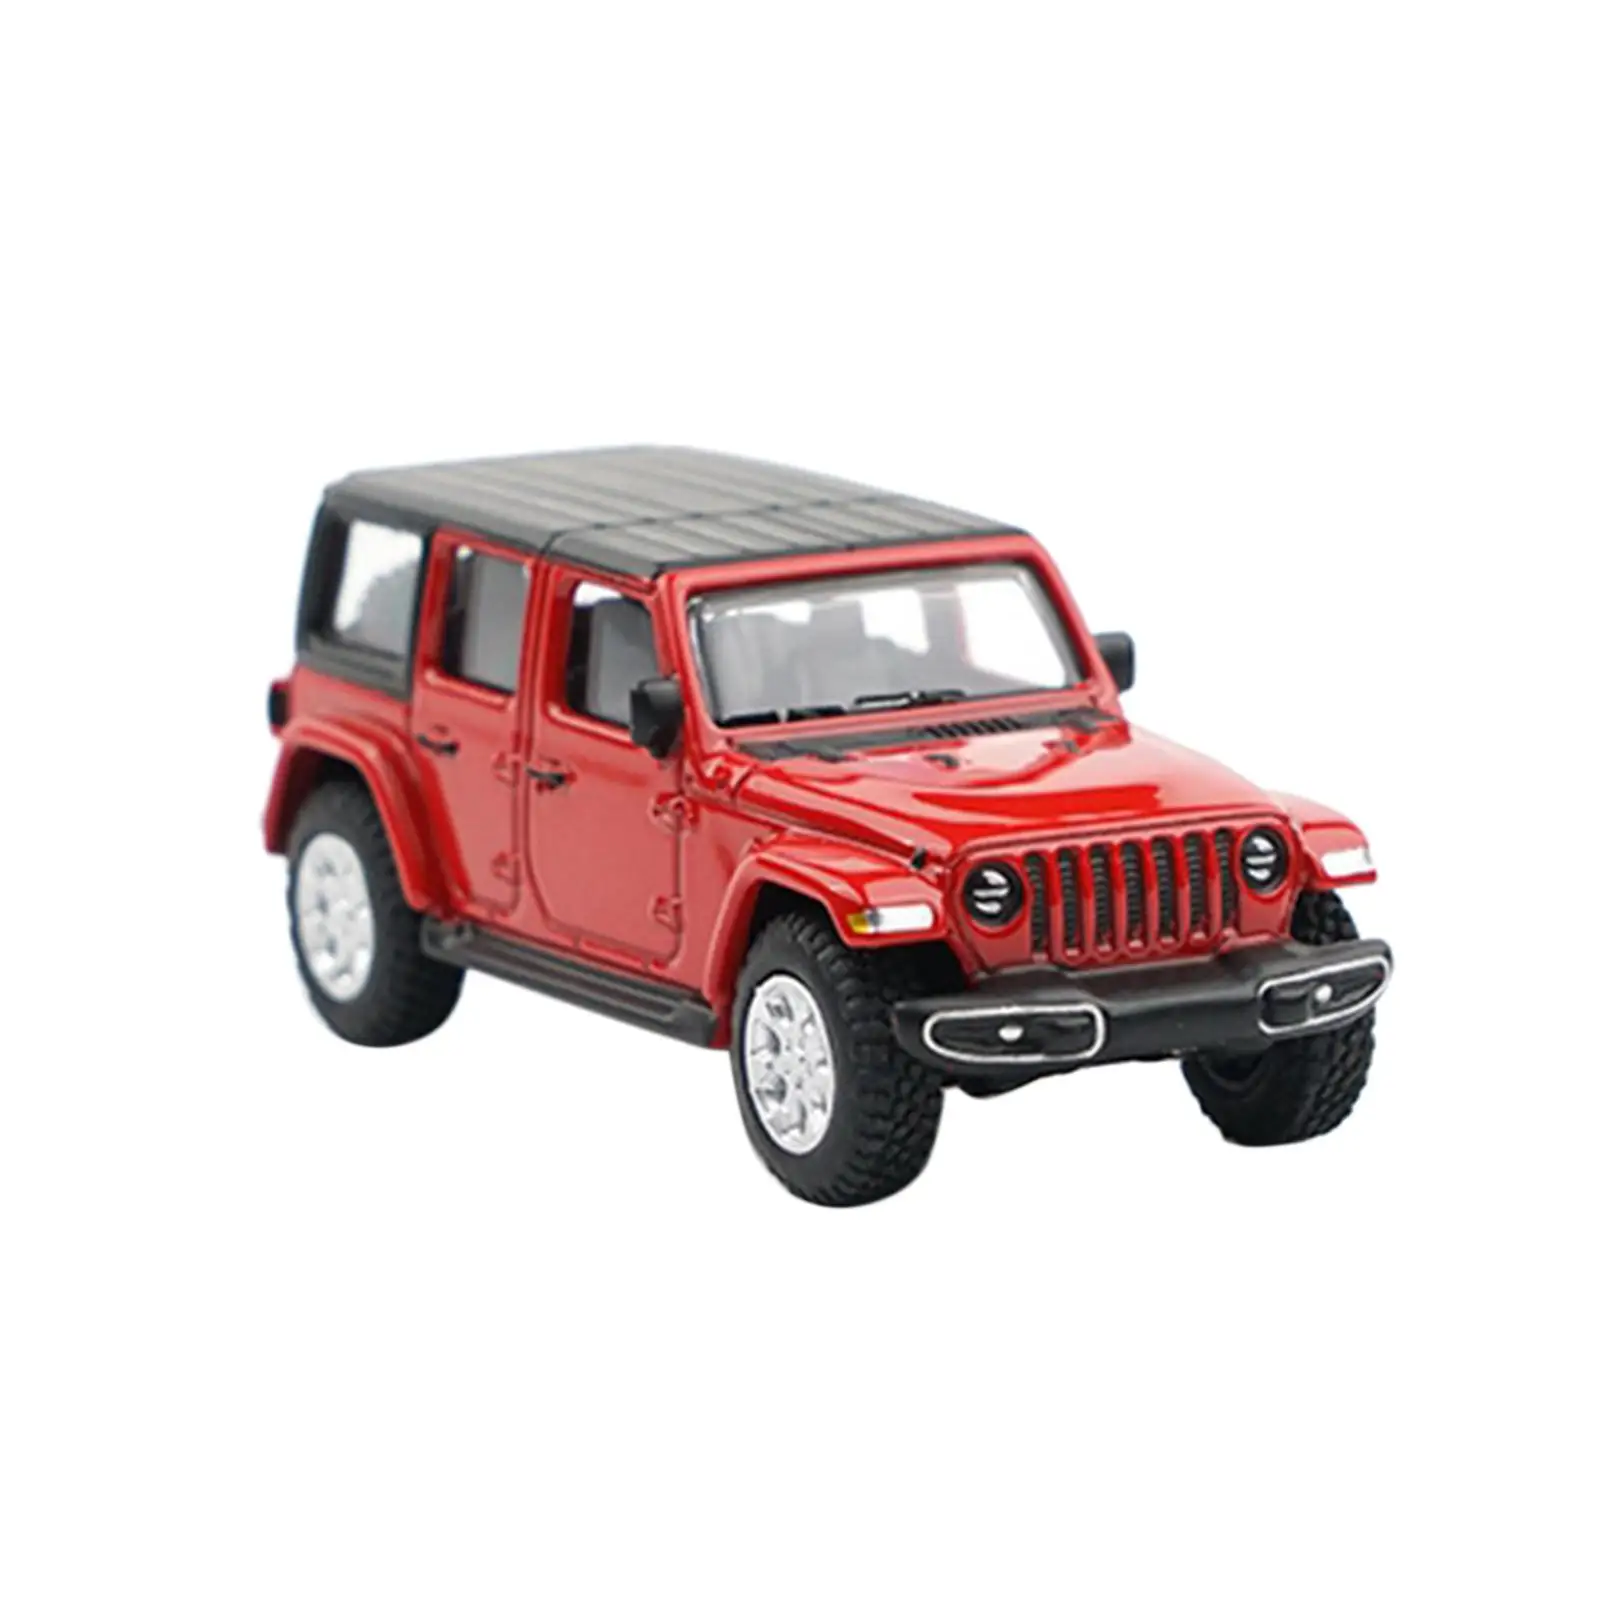 

1/64 Diecast Cars Collectible Model Car Metal Alloy Casting Vehicles toys 1/64 Car Model for Gift Toddlers Kids boy